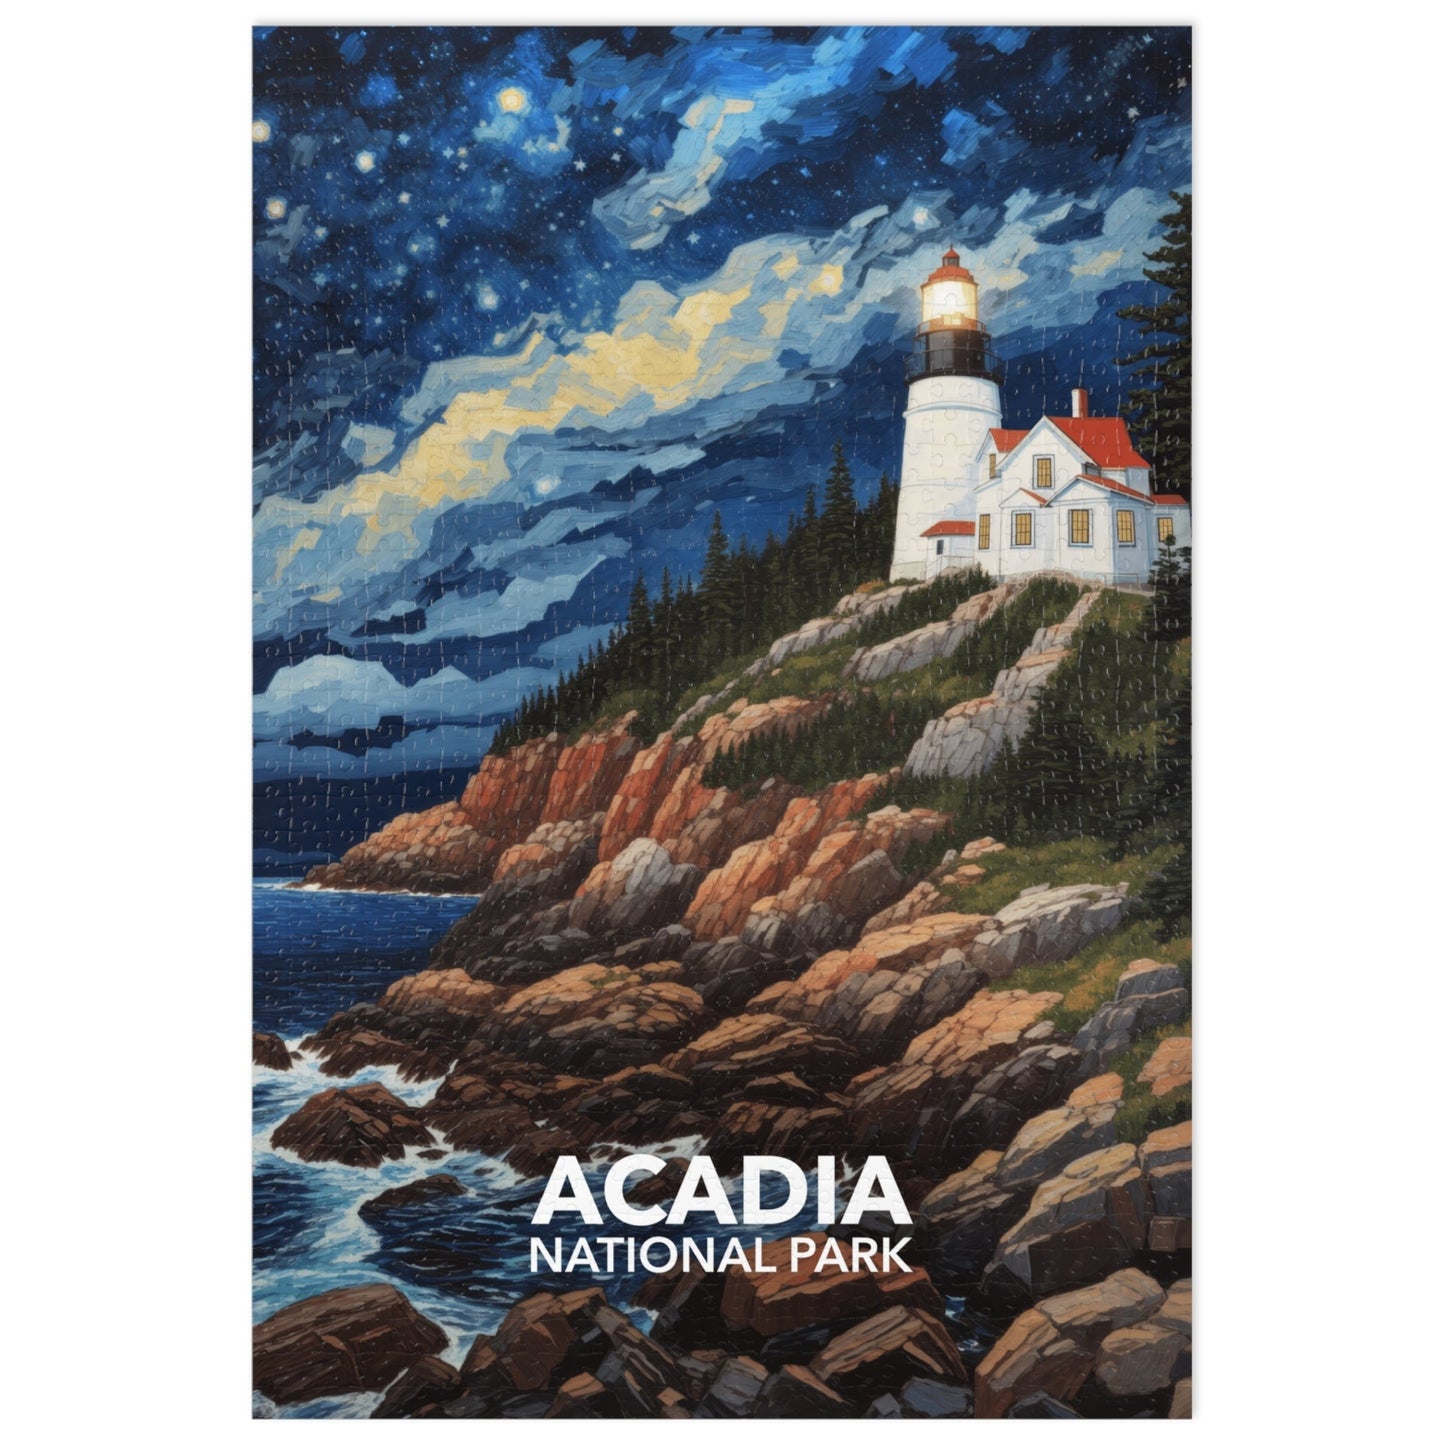 Acadia National Park Jigsaw Puzzle - The Starry Night